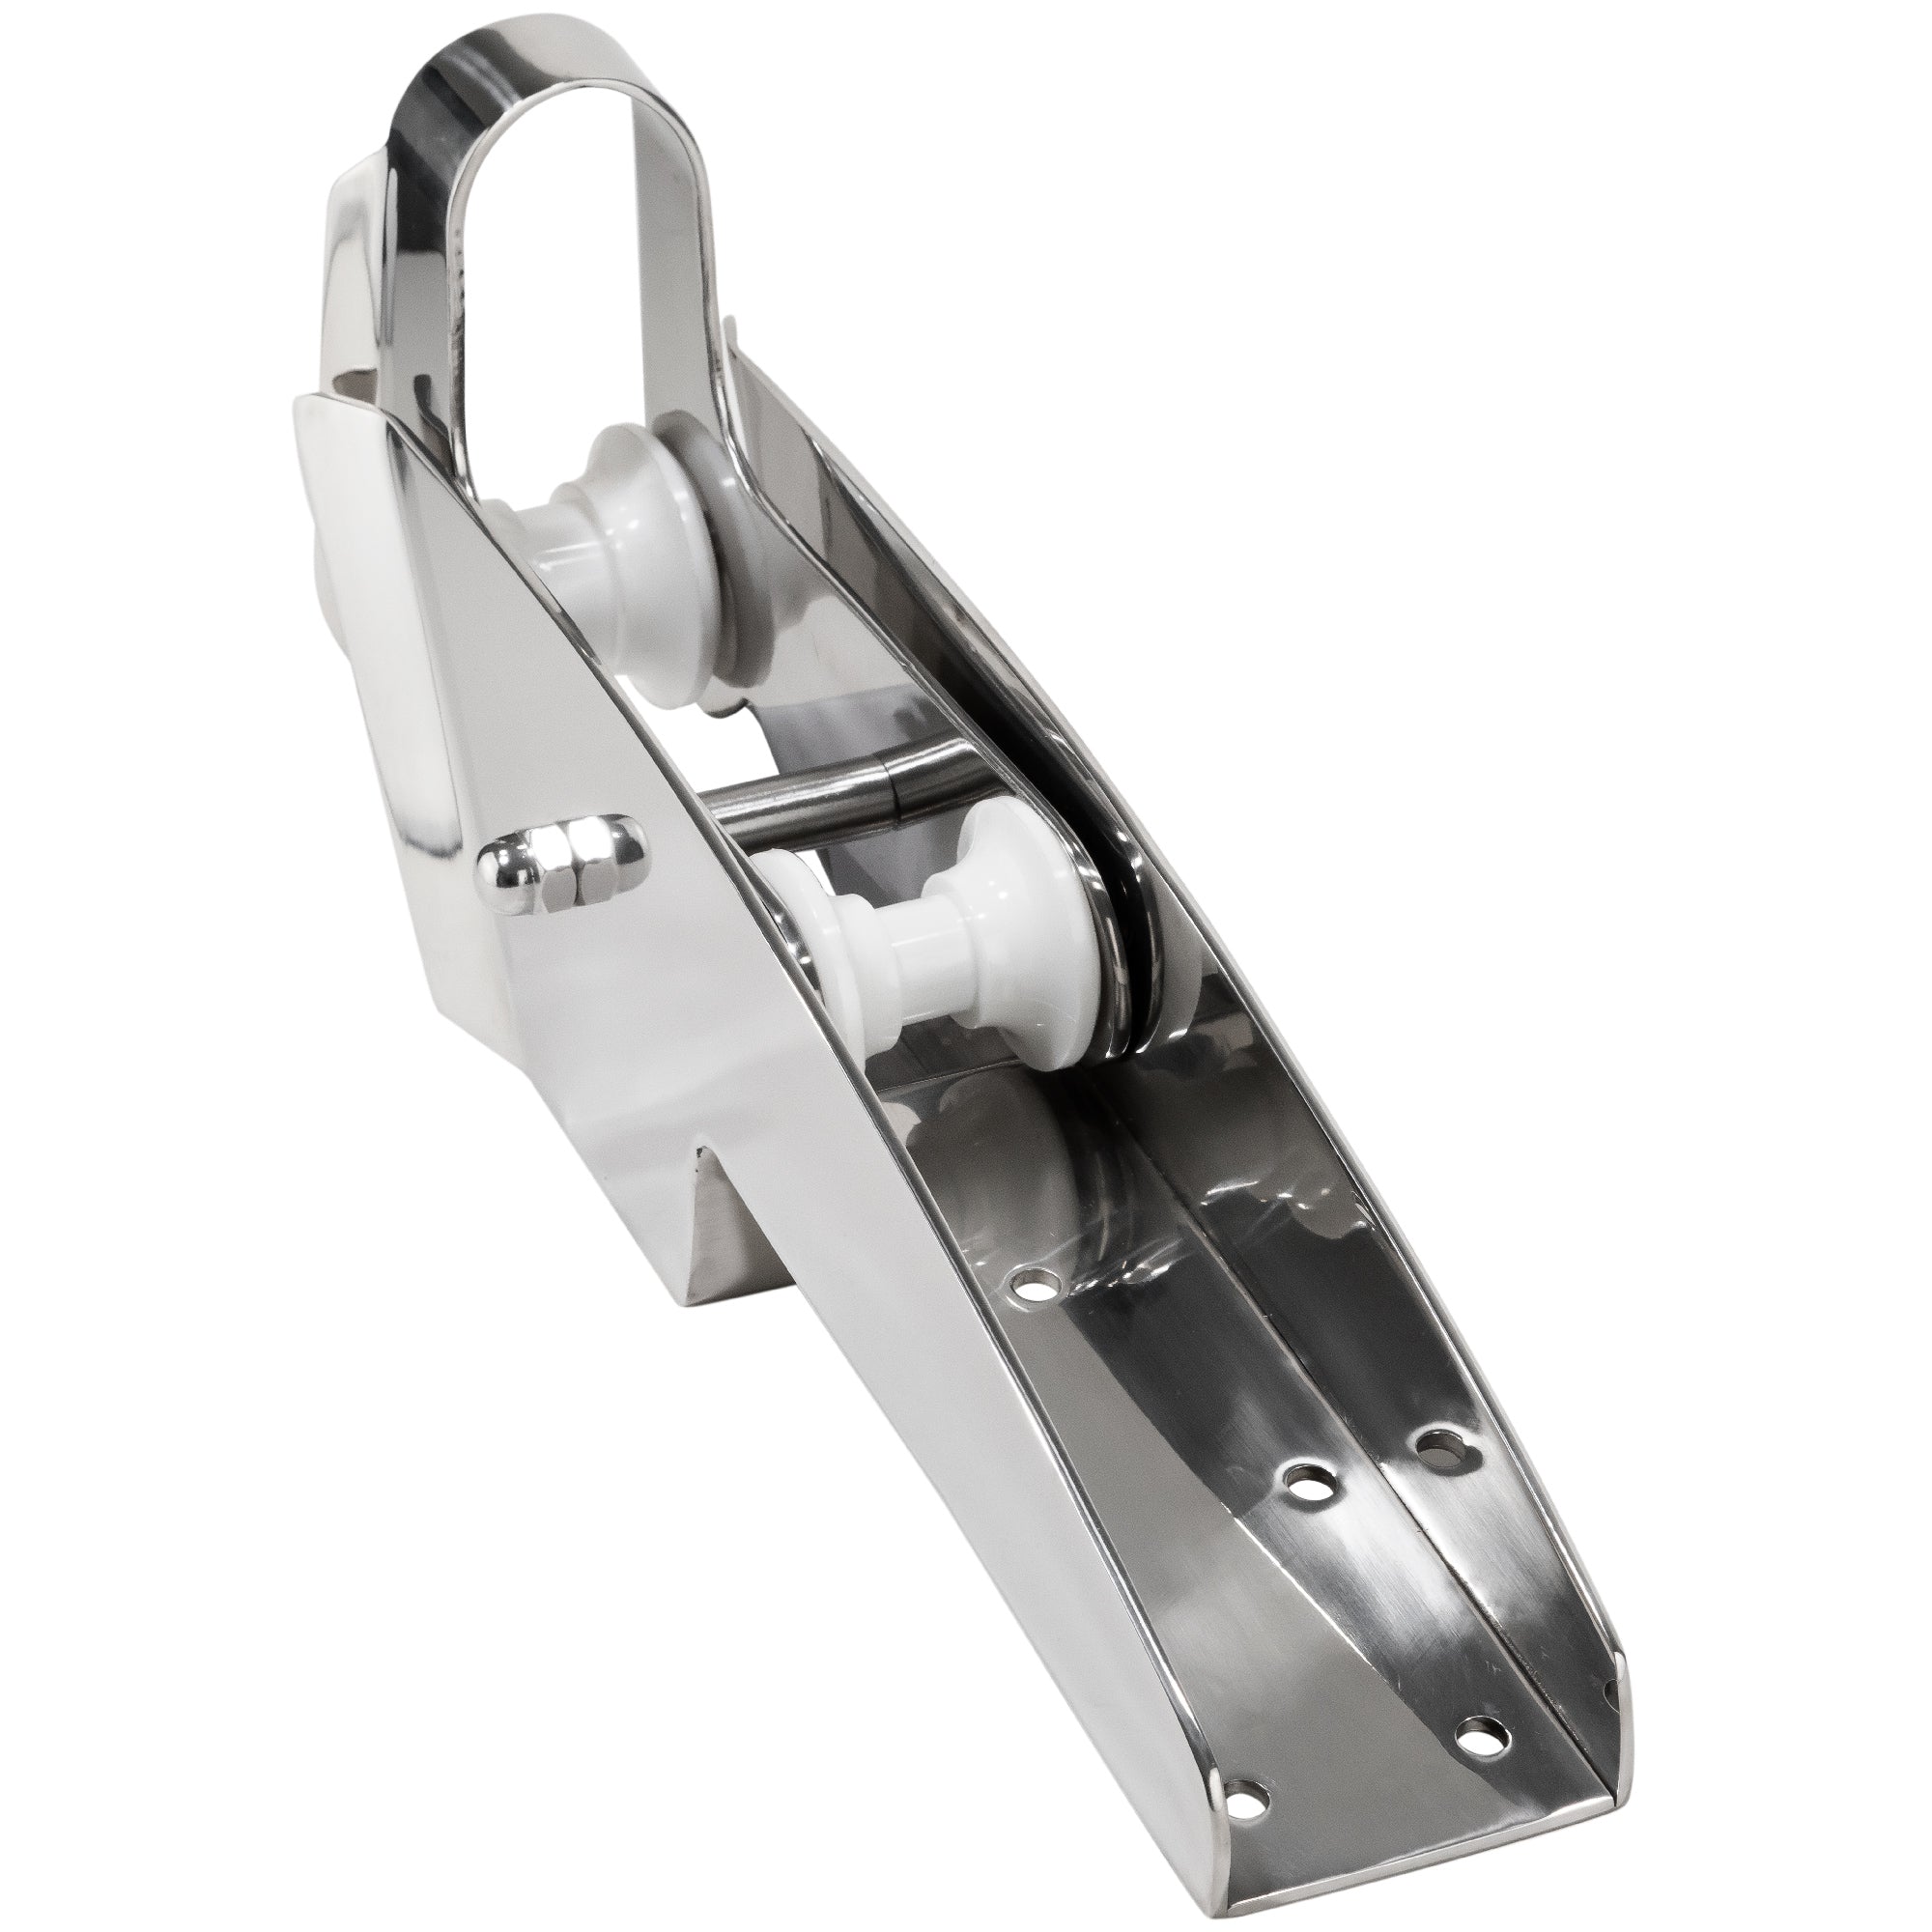 Pivoting Self-launching Anchor Bow Roller, Length 16-1/4", Stainless Steel - FO4184